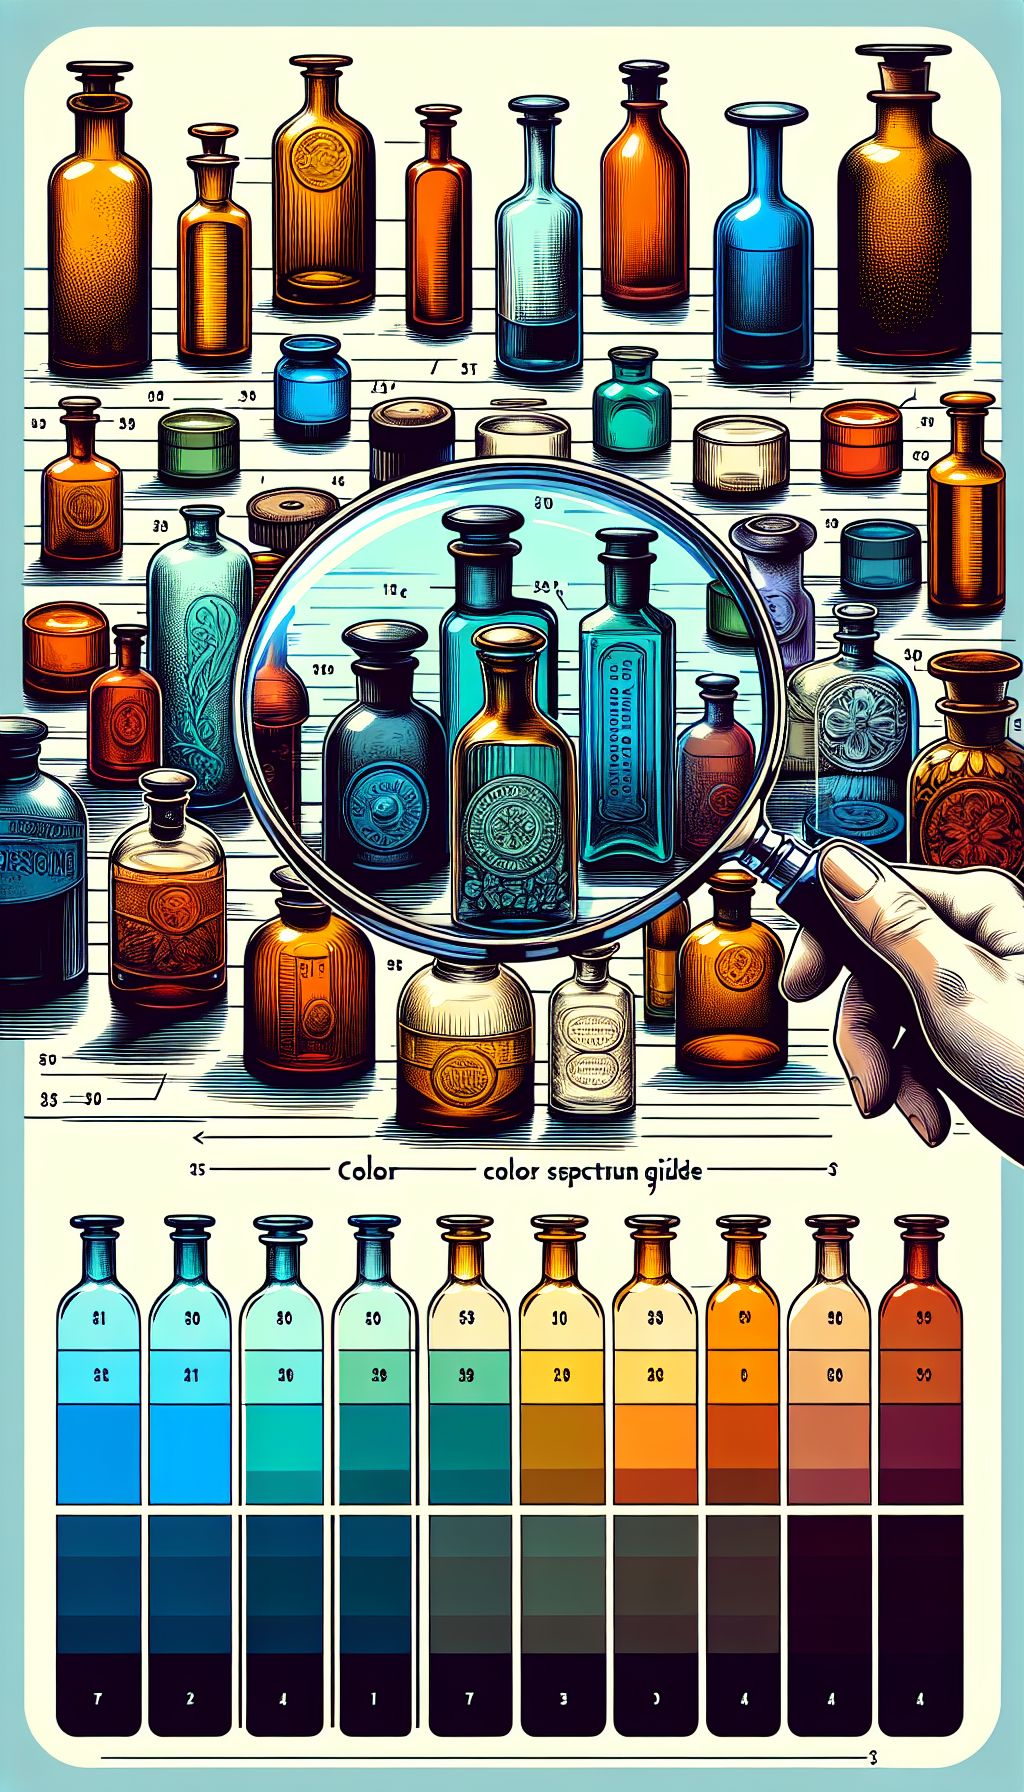 An illustration displays an array of old medicine bottles in various hues, set against a magnifying glass backdrop, revealing intricate details and imperfections. The bottles, varying from amber to cobalt, are subtly numbered, with a color spectrum guide at the bottom, symbolizing the identification process. The glass quality is depicted by contrasting textures: smooth, bubbled, and cracked within the magnifying focus.